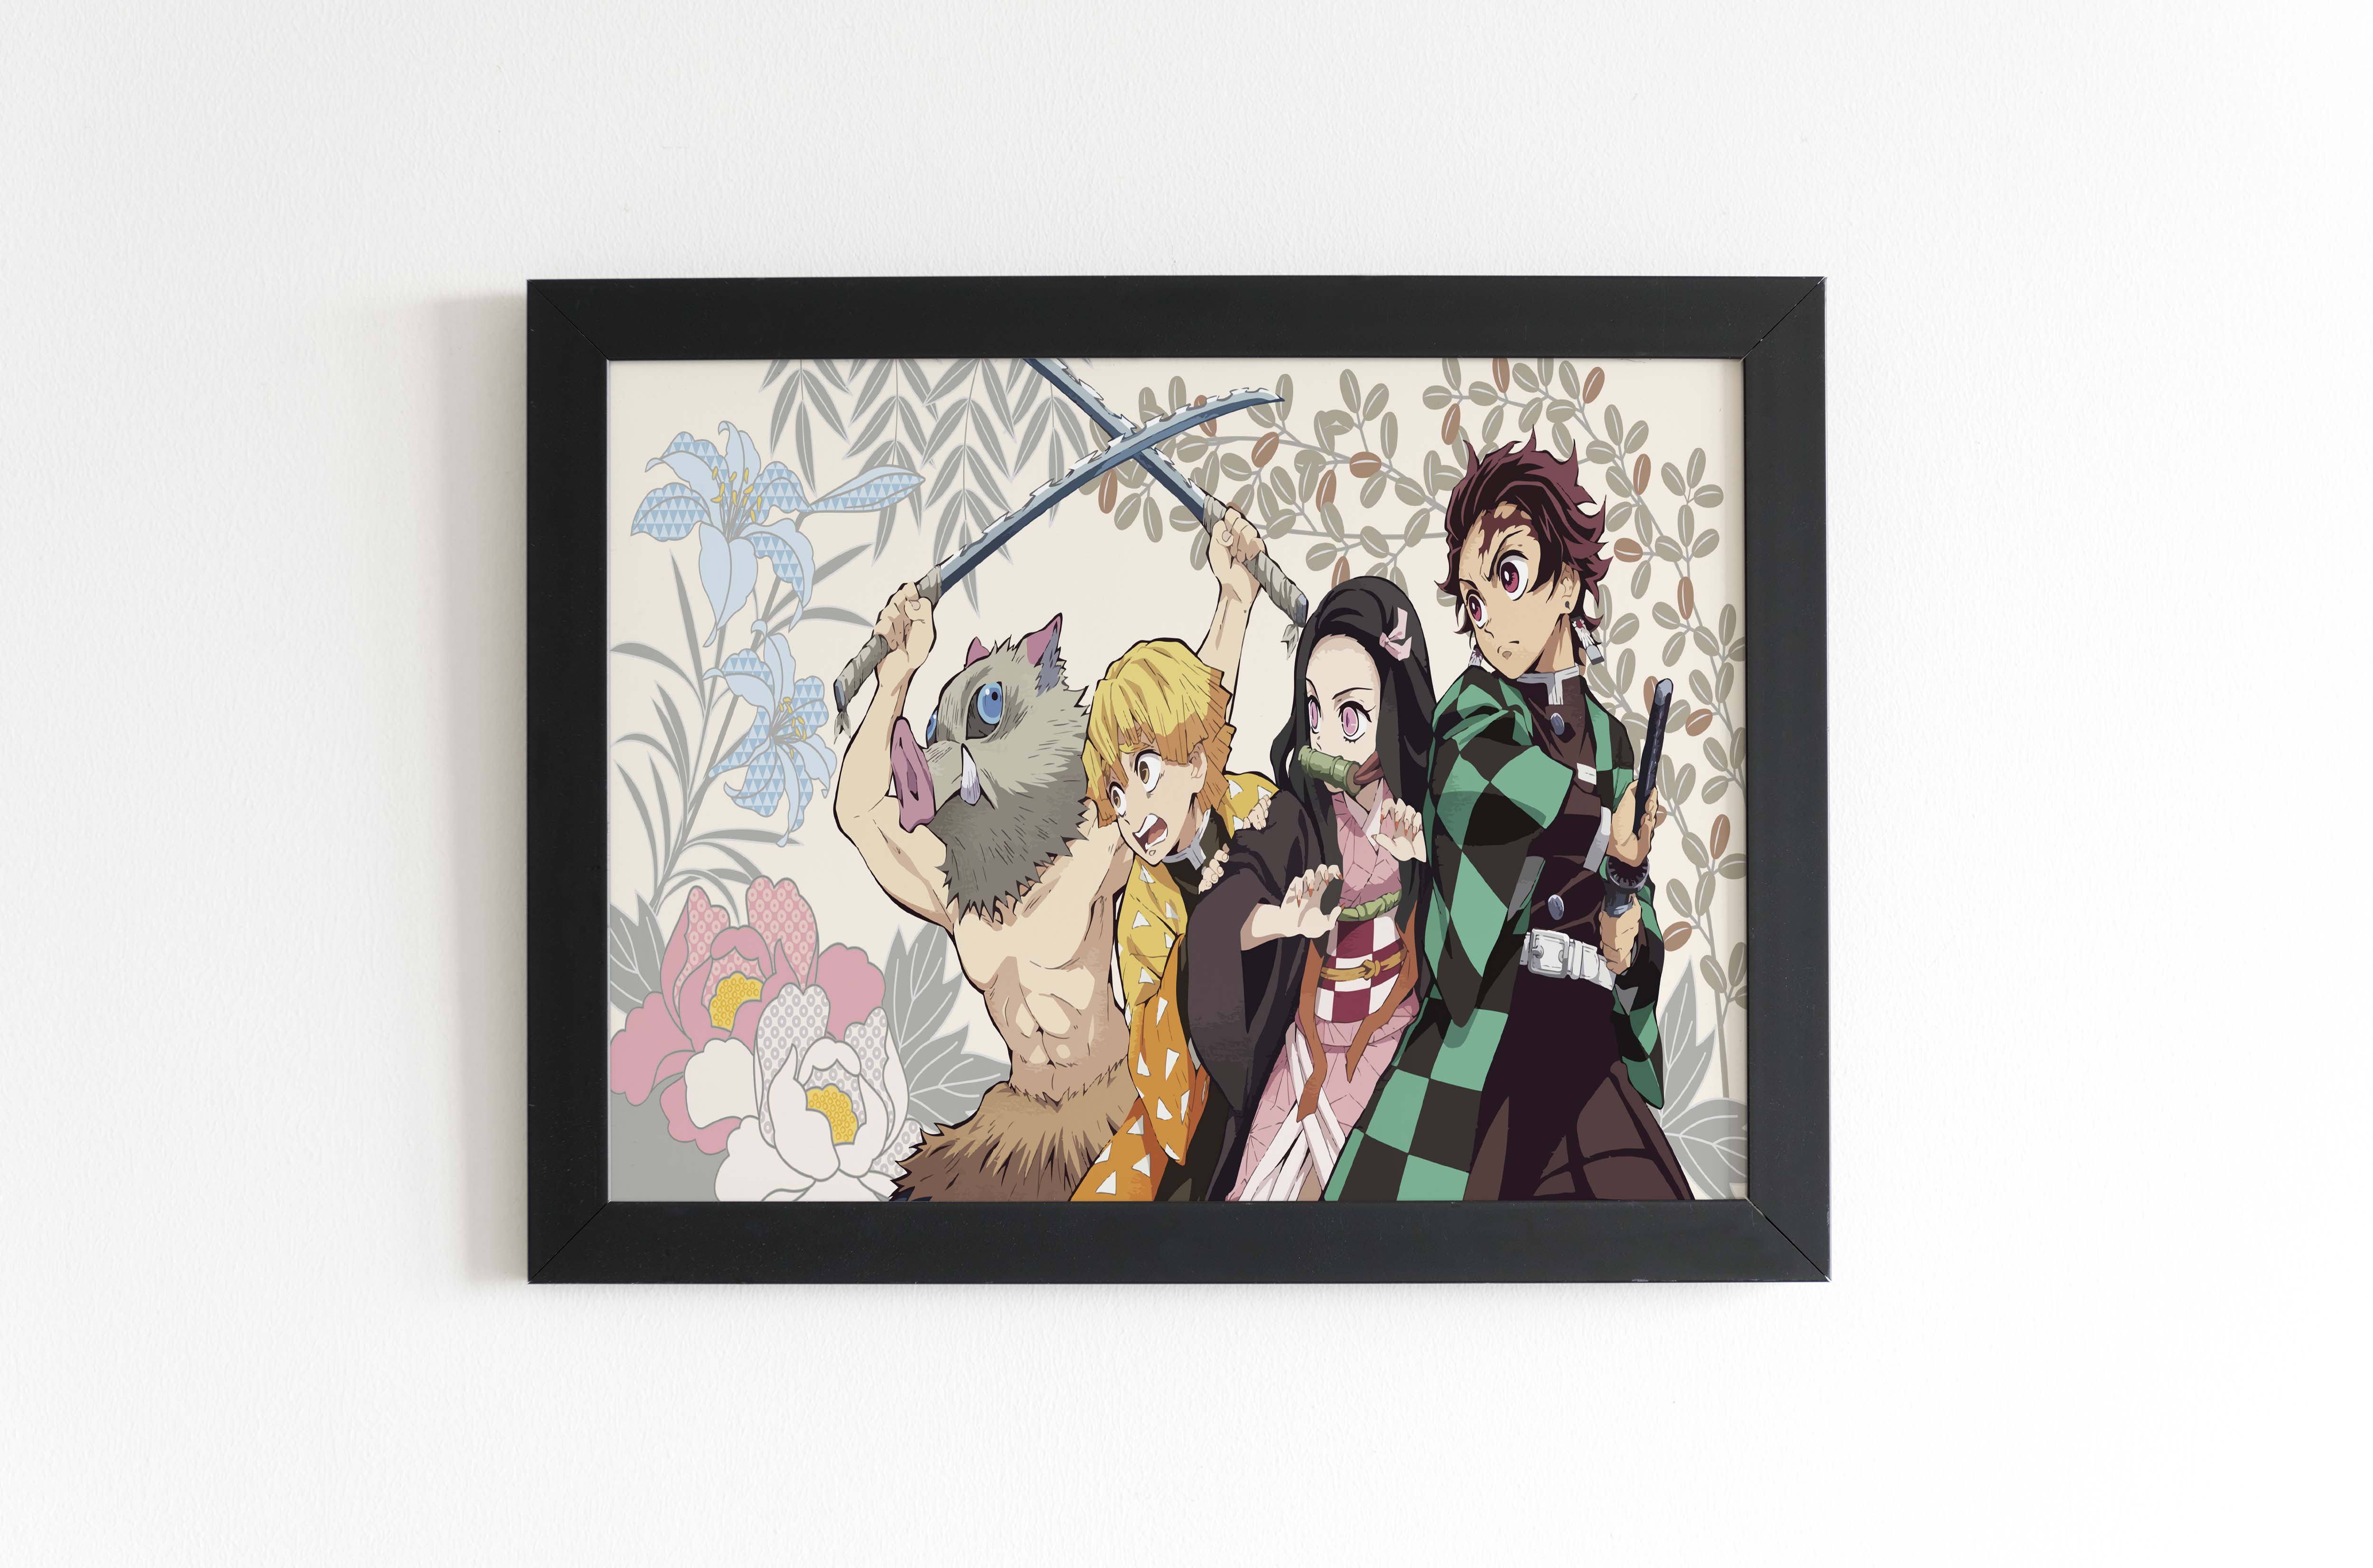 Poster Best Tokyo Revengers Anime Series Matte Finish Paper Poster Print 12  x 18 Inch (Multicolor) PB-14393 : Buy Online at Best Price in KSA - Souq is  now : Home